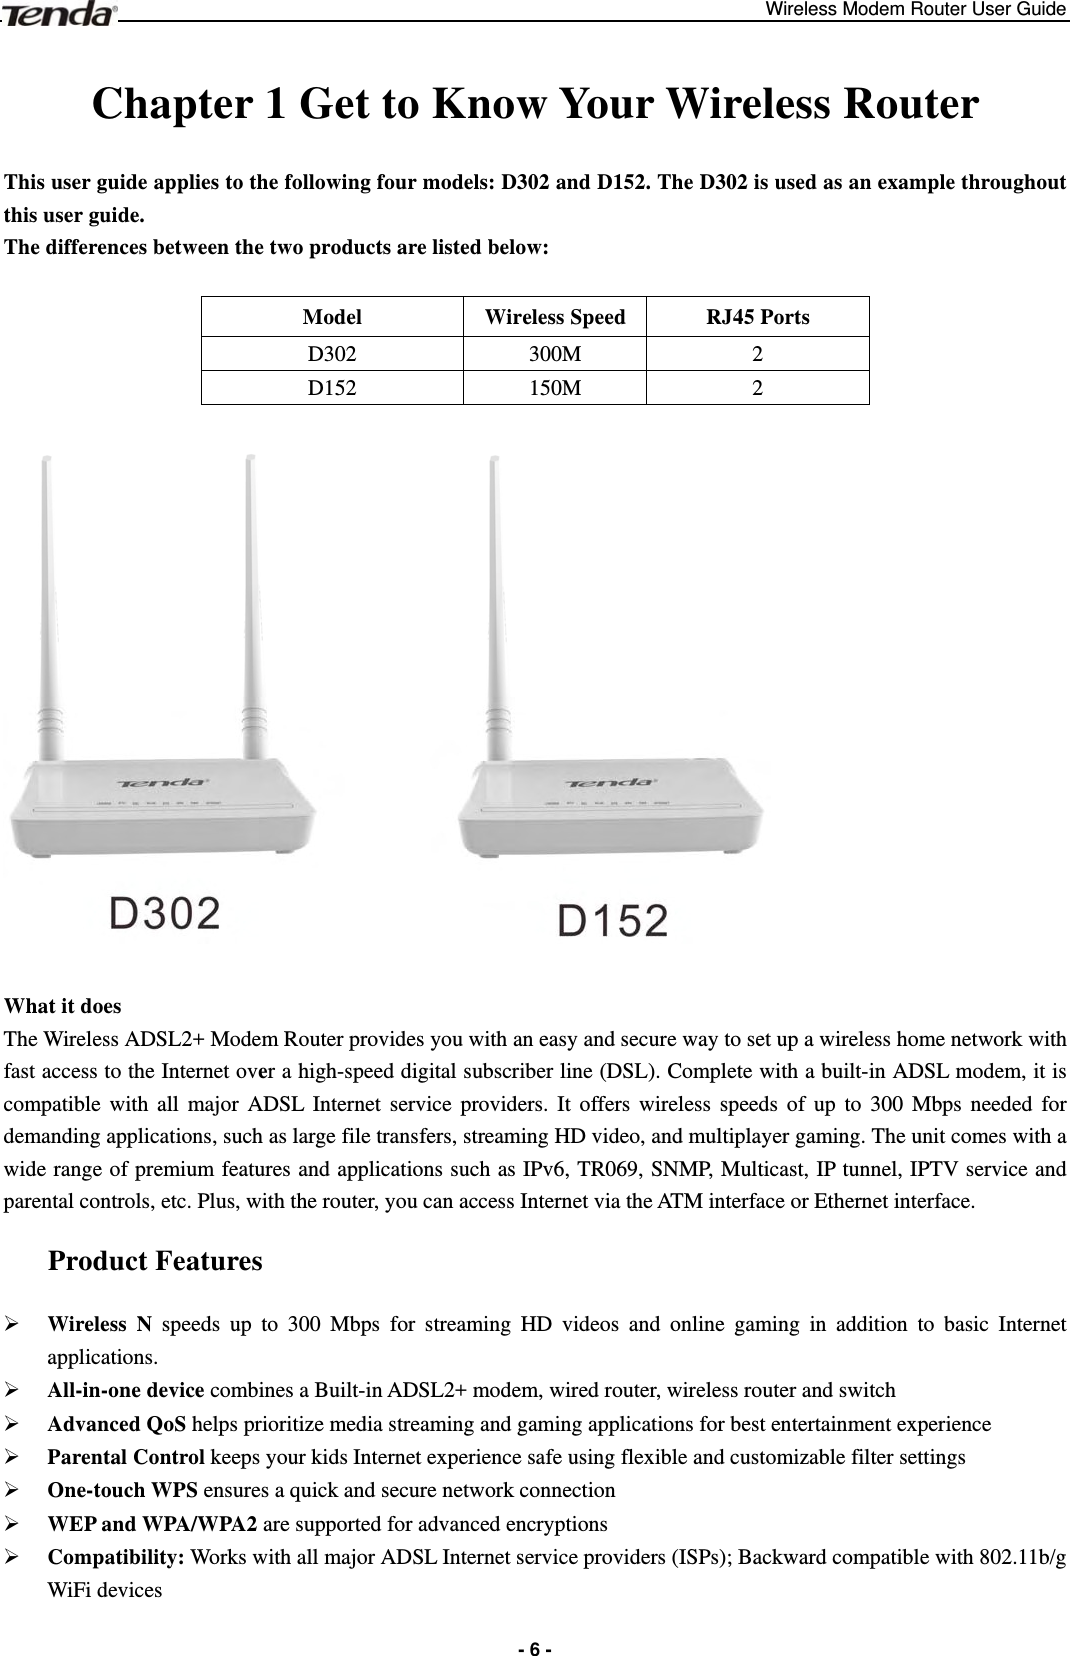 Wireless Modem Router User Guide  -6 - Chapter 1 Get to Know Your Wireless Router   This user guide applies to the following four models: D302 and D152. The D302 is used as an example throughout this user guide.   The differences between the two products are listed below:  Model  Wireless Speed  RJ45 Ports D302 300M 2 D152 150M 2    What it does The Wireless ADSL2+ Modem Router provides you with an easy and secure way to set up a wireless home network with fast access to the Internet over a high-speed digital subscriber line (DSL). Complete with a built-in ADSL modem, it is compatible with all major ADSL Internet service providers. It offers wireless speeds of up to 300 Mbps needed for demanding applications, such as large file transfers, streaming HD video, and multiplayer gaming. The unit comes with a wide range of premium features and applications such as IPv6, TR069, SNMP, Multicast, IP tunnel, IPTV service and parental controls, etc. Plus, with the router, you can access Internet via the ATM interface or Ethernet interface. Product Features ¾ Wireless N speeds up to 300 Mbps for streaming HD videos and online gaming in addition to basic Internet       applications.  ¾ All-in-one device combines a Built-in ADSL2+ modem, wired router, wireless router and switch ¾ Advanced QoS helps prioritize media streaming and gaming applications for best entertainment experience ¾ Parental Control keeps your kids Internet experience safe using flexible and customizable filter settings ¾ One-touch WPS ensures a quick and secure network connection   ¾ WEP and WPA/WPA2 are supported for advanced encryptions ¾ Compatibility: Works with all major ADSL Internet service providers (ISPs); Backward compatible with 802.11b/g WiFi devices 